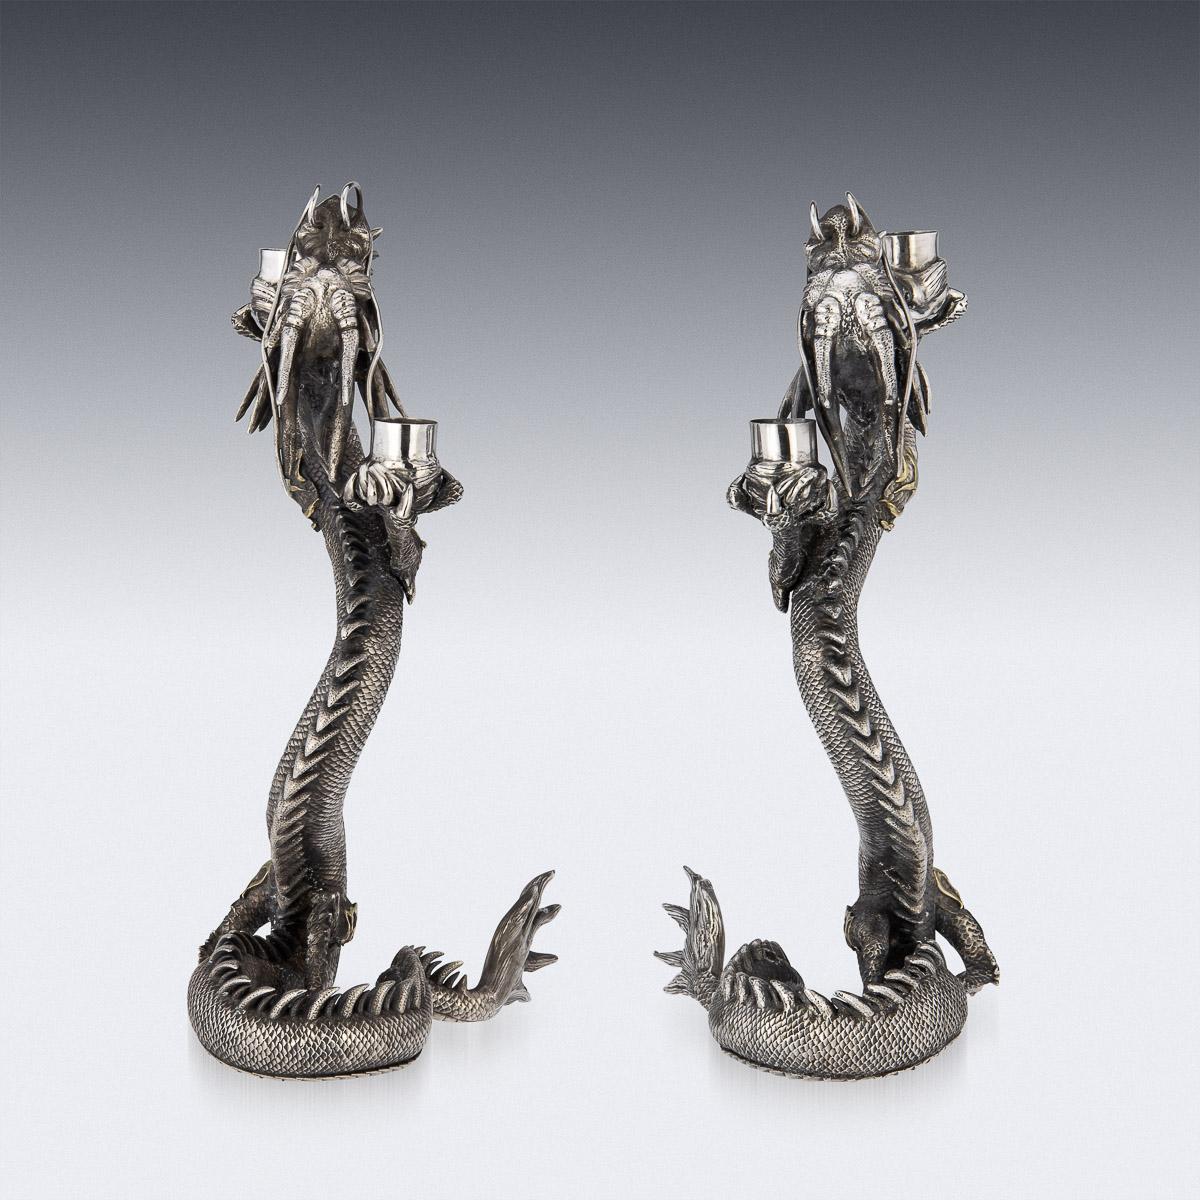 19th Century Japanese Meiji period silver dragon shaped candelabras. Cast and carved as a serpentine water dragons, spiked body, with mouth open, with both arms up holding the candlesticks. The piece dates to the Meiji period (1890-1912), Marked